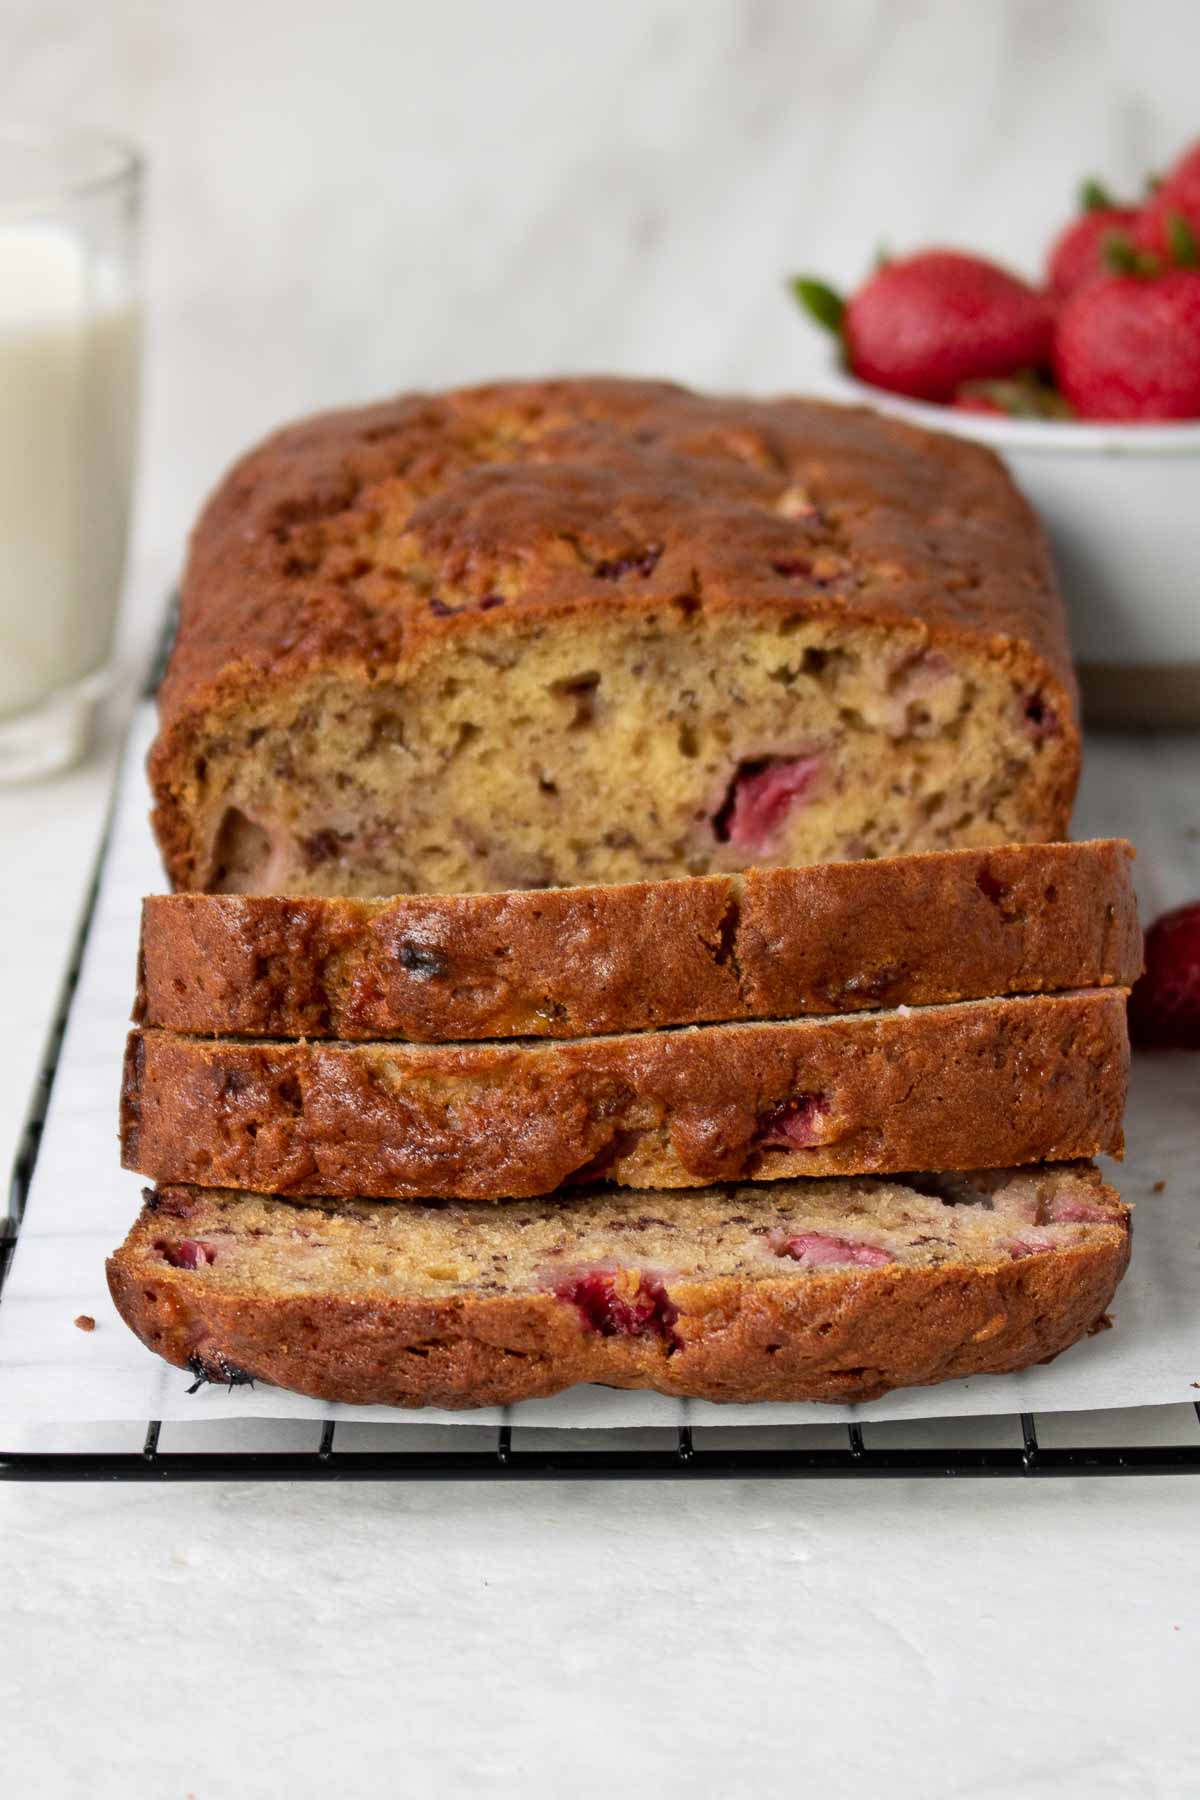 Image of a strawberry banana bread loaf with three slices cut, placed on a baking rack alongside a glass of milk and a bowl of strawberries.